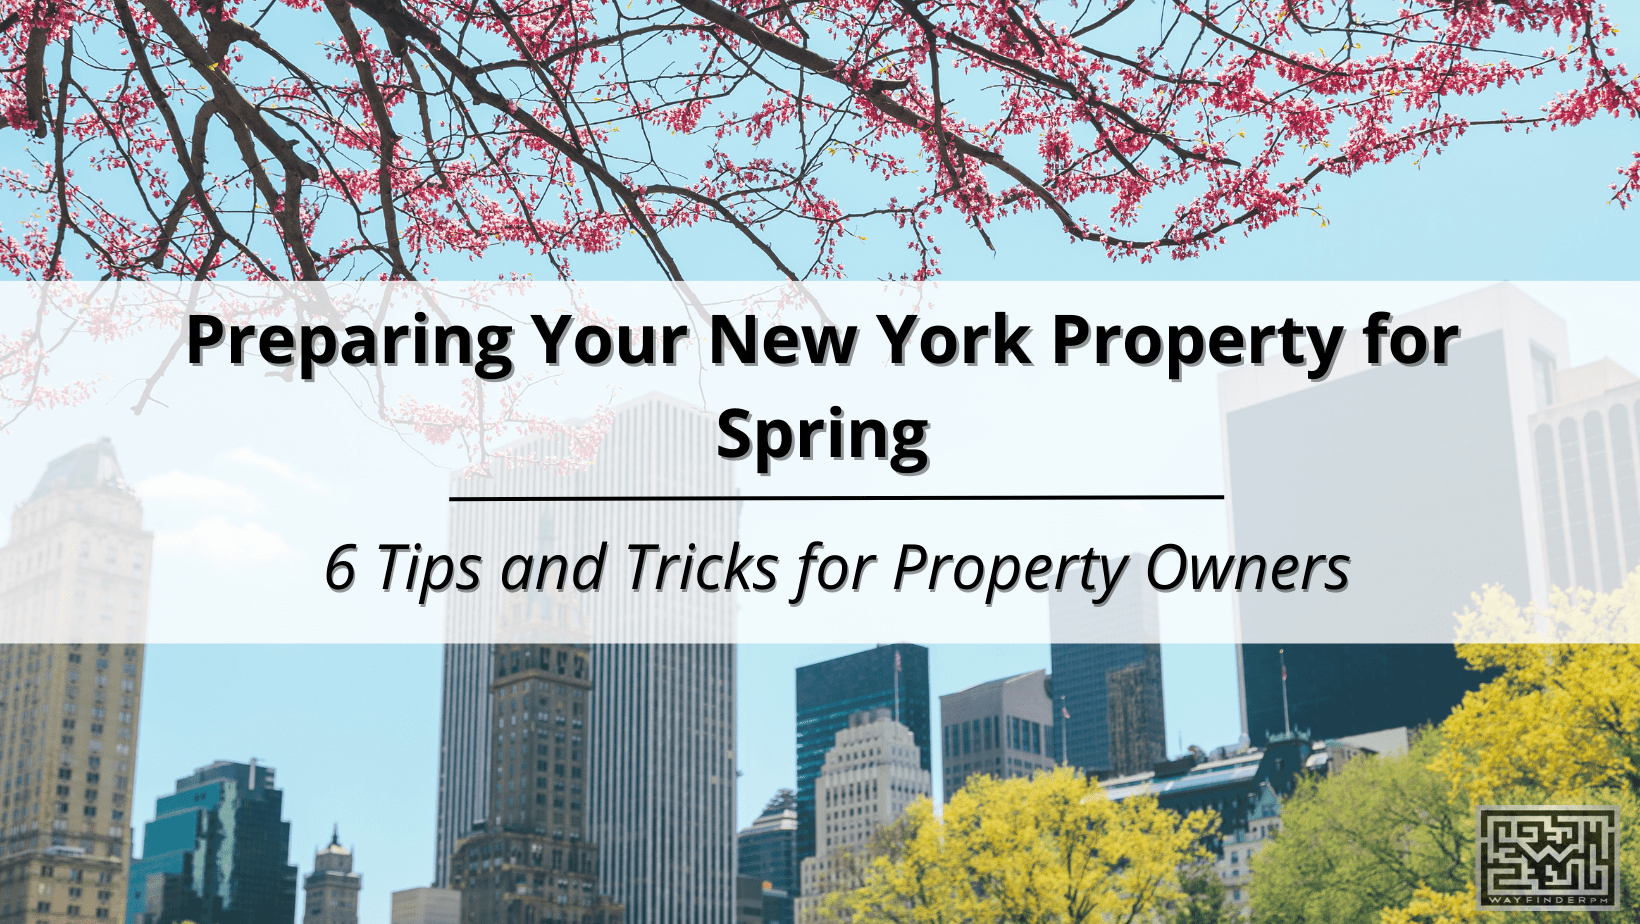 Preparing Your New York Property for Spring: 6 Tips and Tricks for Property Owners